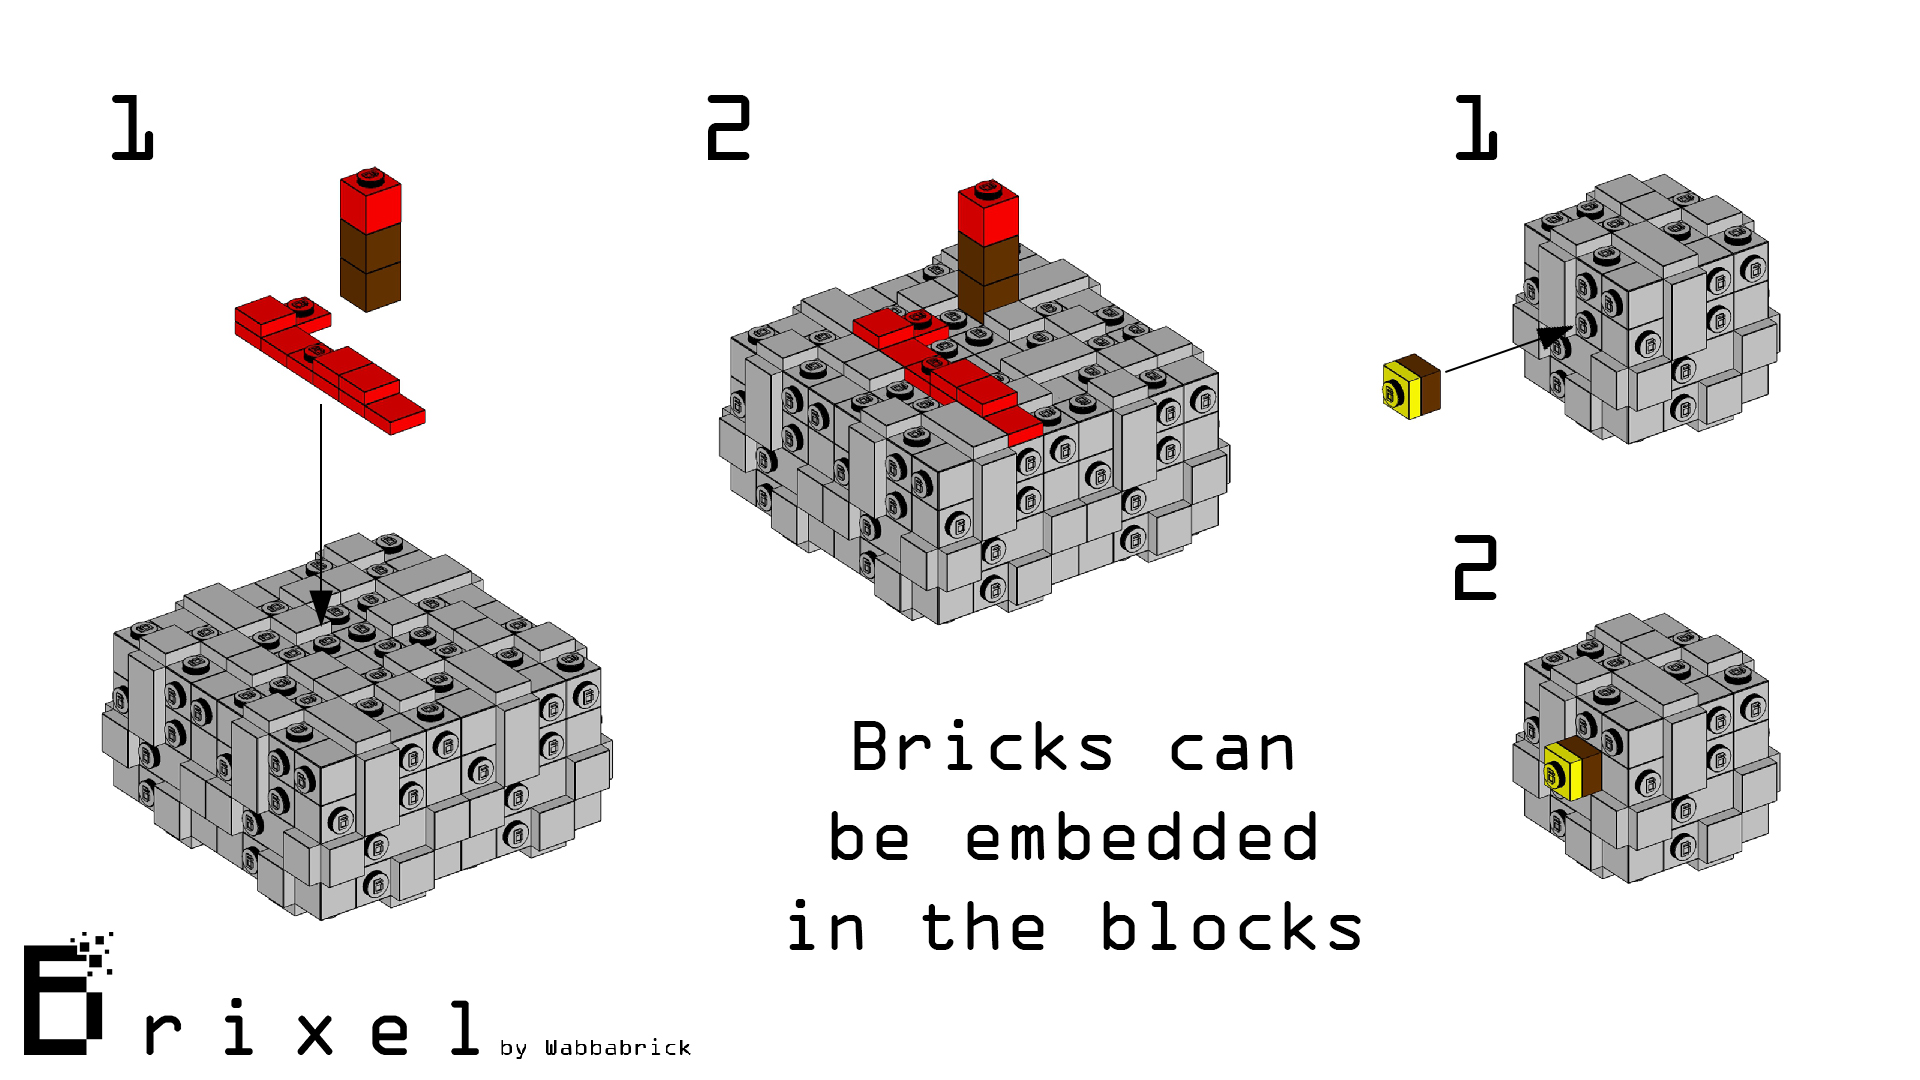 Bricks "click" into each other